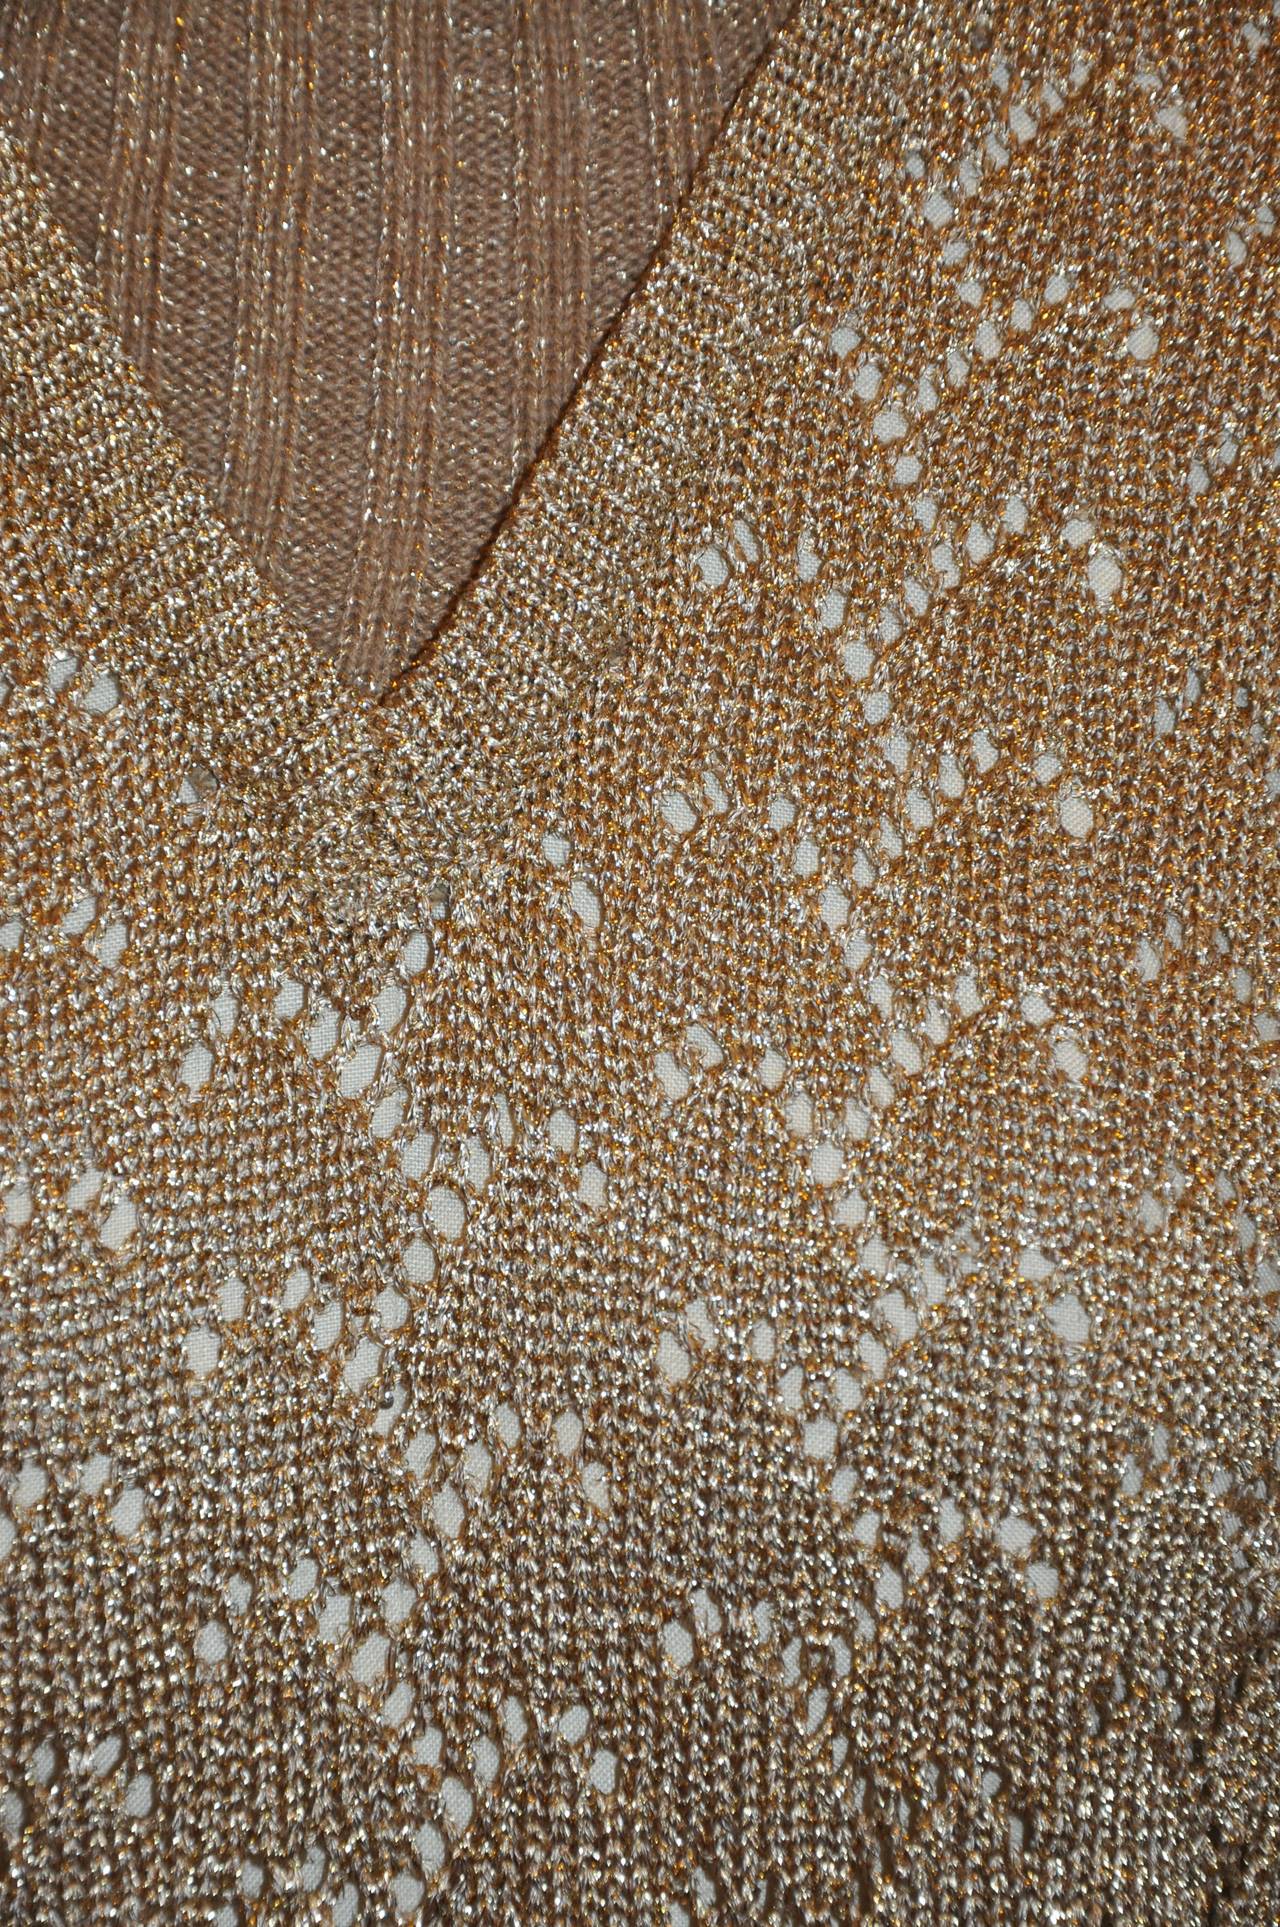 Moschino 'Couture' tan merino wool woven with metallic gold lame and accented with woven gold lame in both front and back. Turtle neck measures 5 1/2